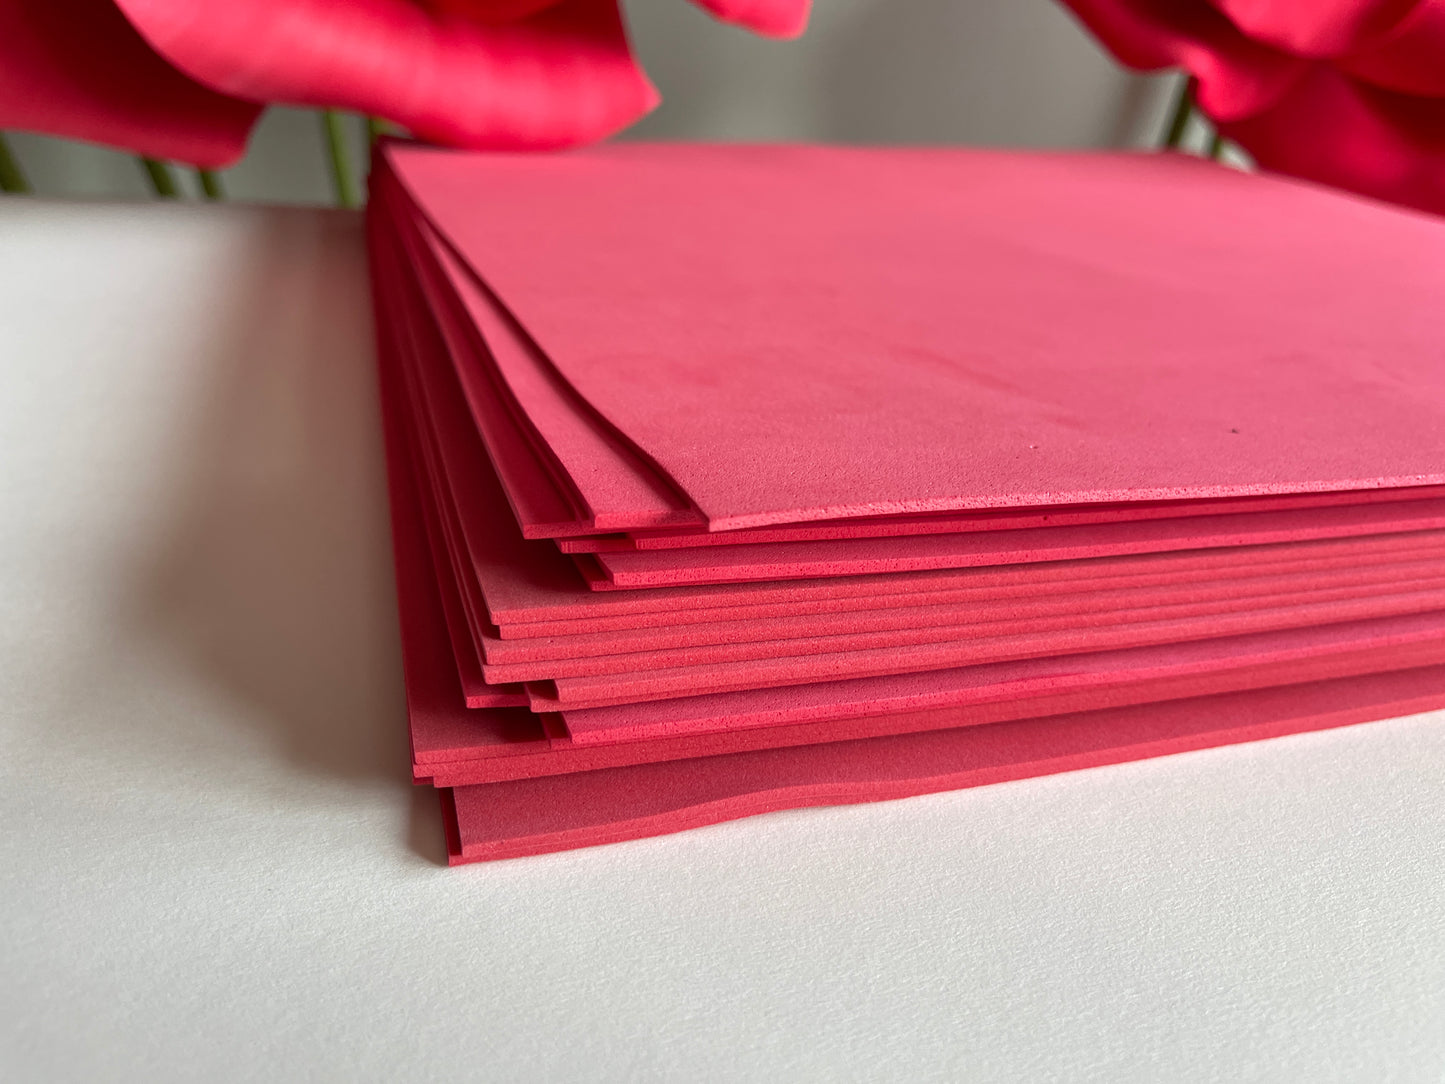 Soft Eva Foam 2 mm thickness Sheets 50x50 cm for Giant Flowers Making